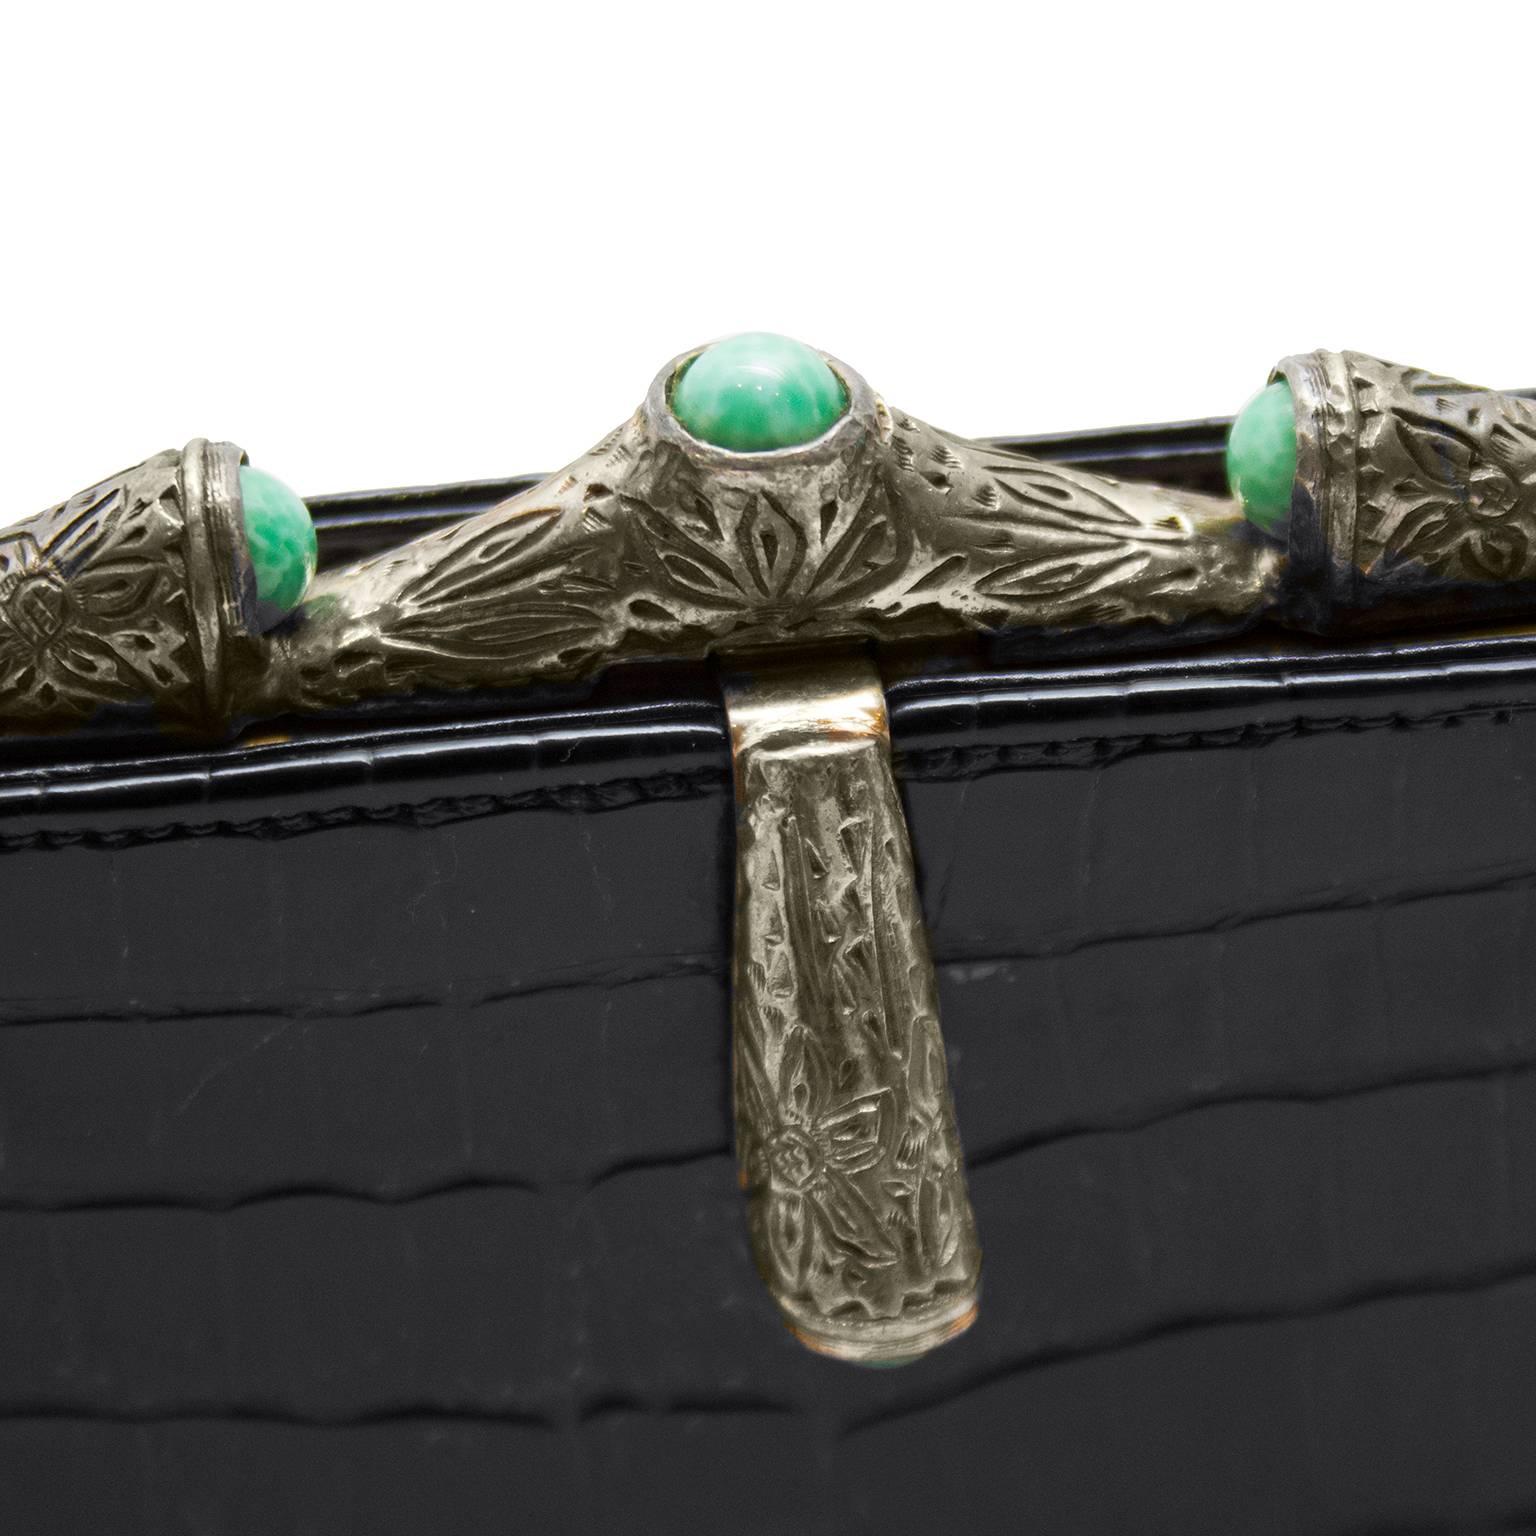 Women's 1950s Black Croc Evening Clutch with Silver and Turquoise Details